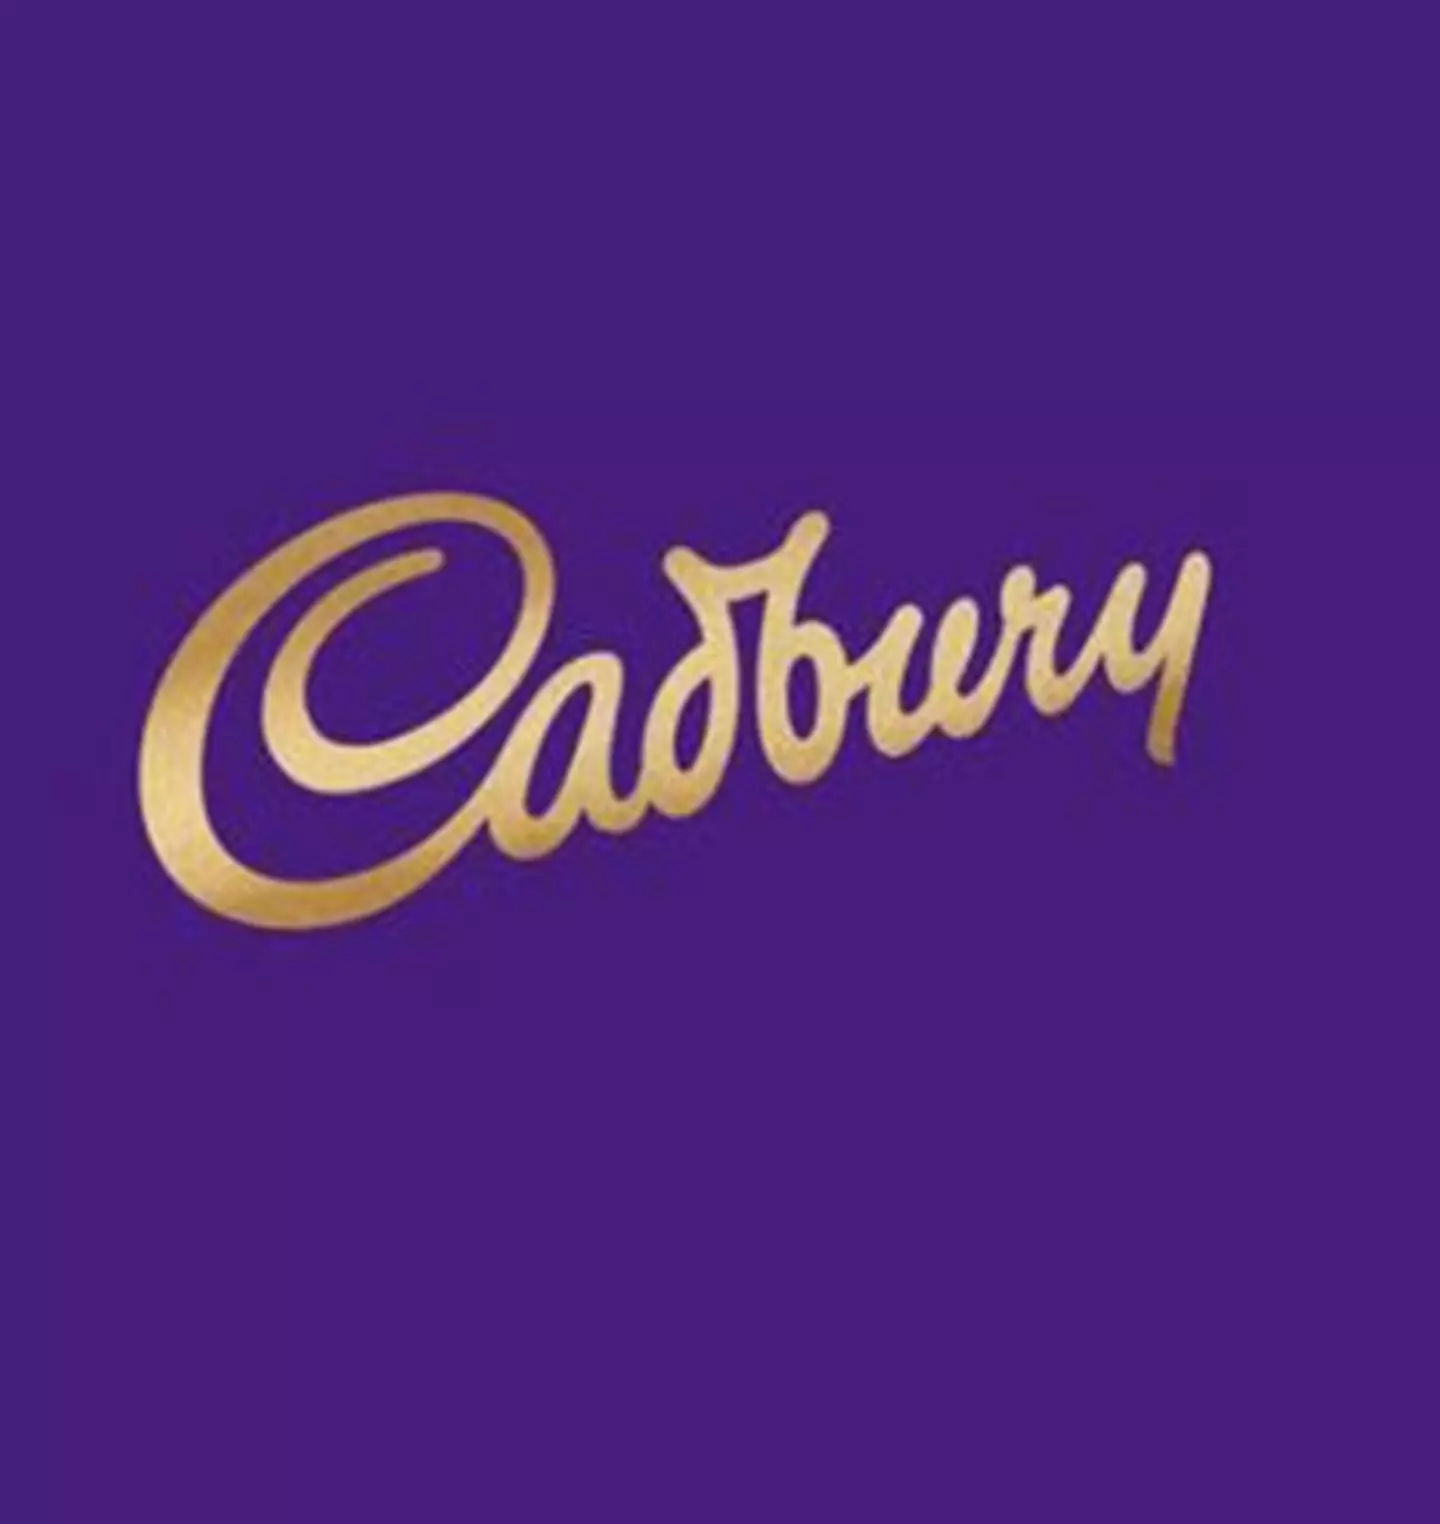 If you are in possession of any these Cadbury products, you should return them as soon as possible.